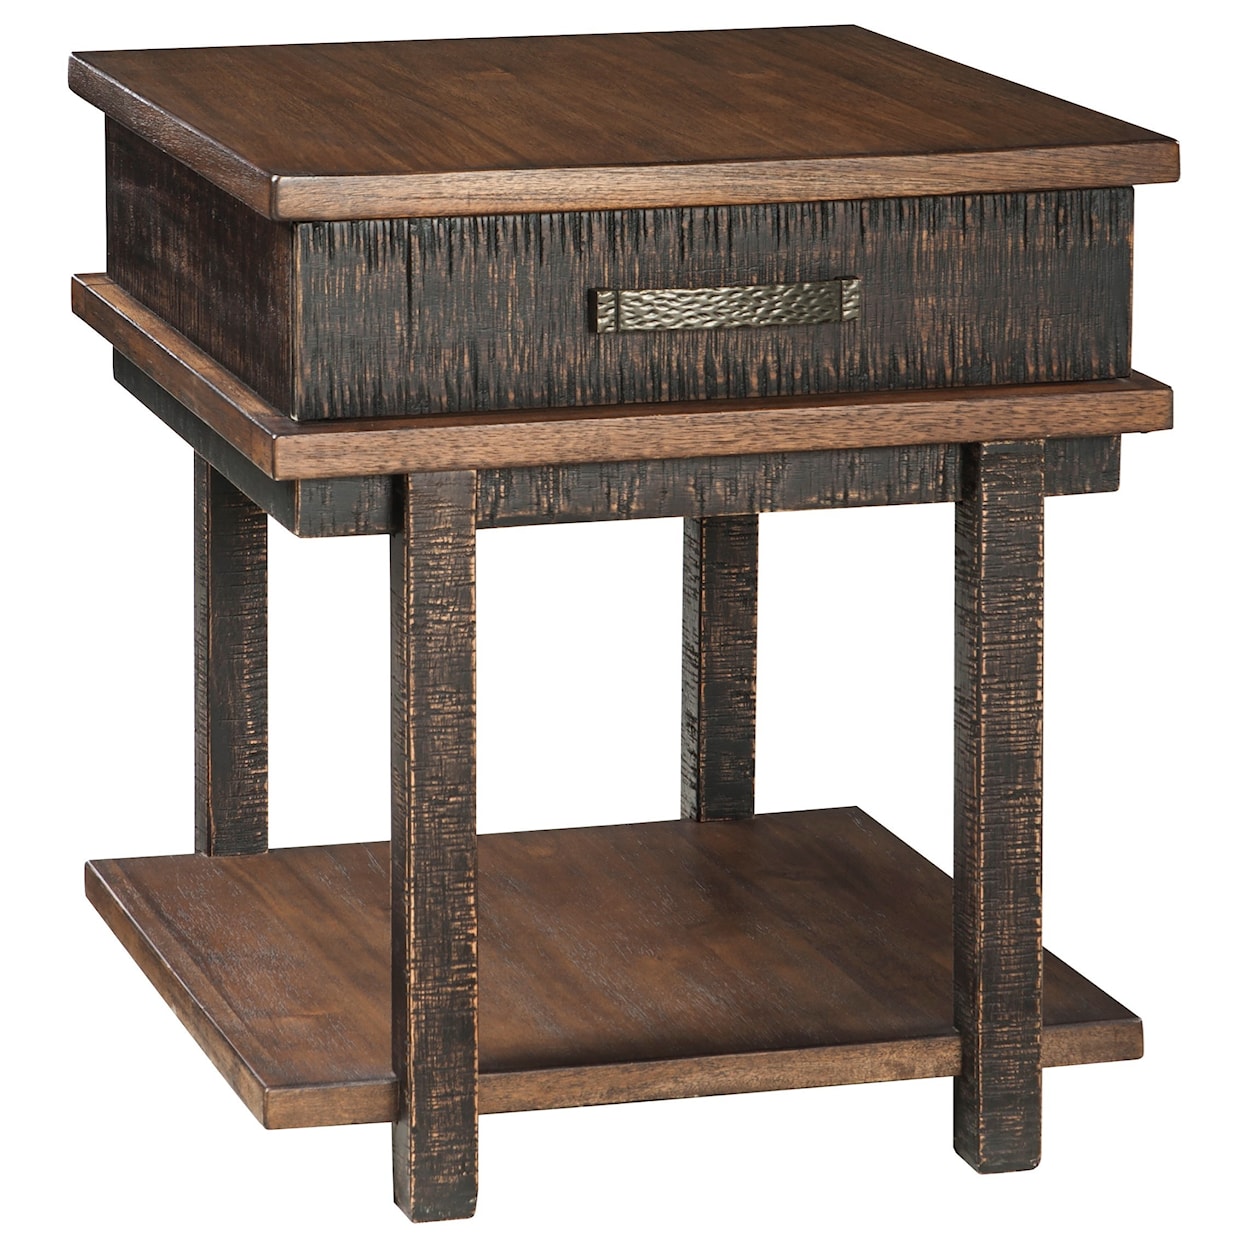 Signature Design by Ashley Furniture Stanah Rectangular End Table